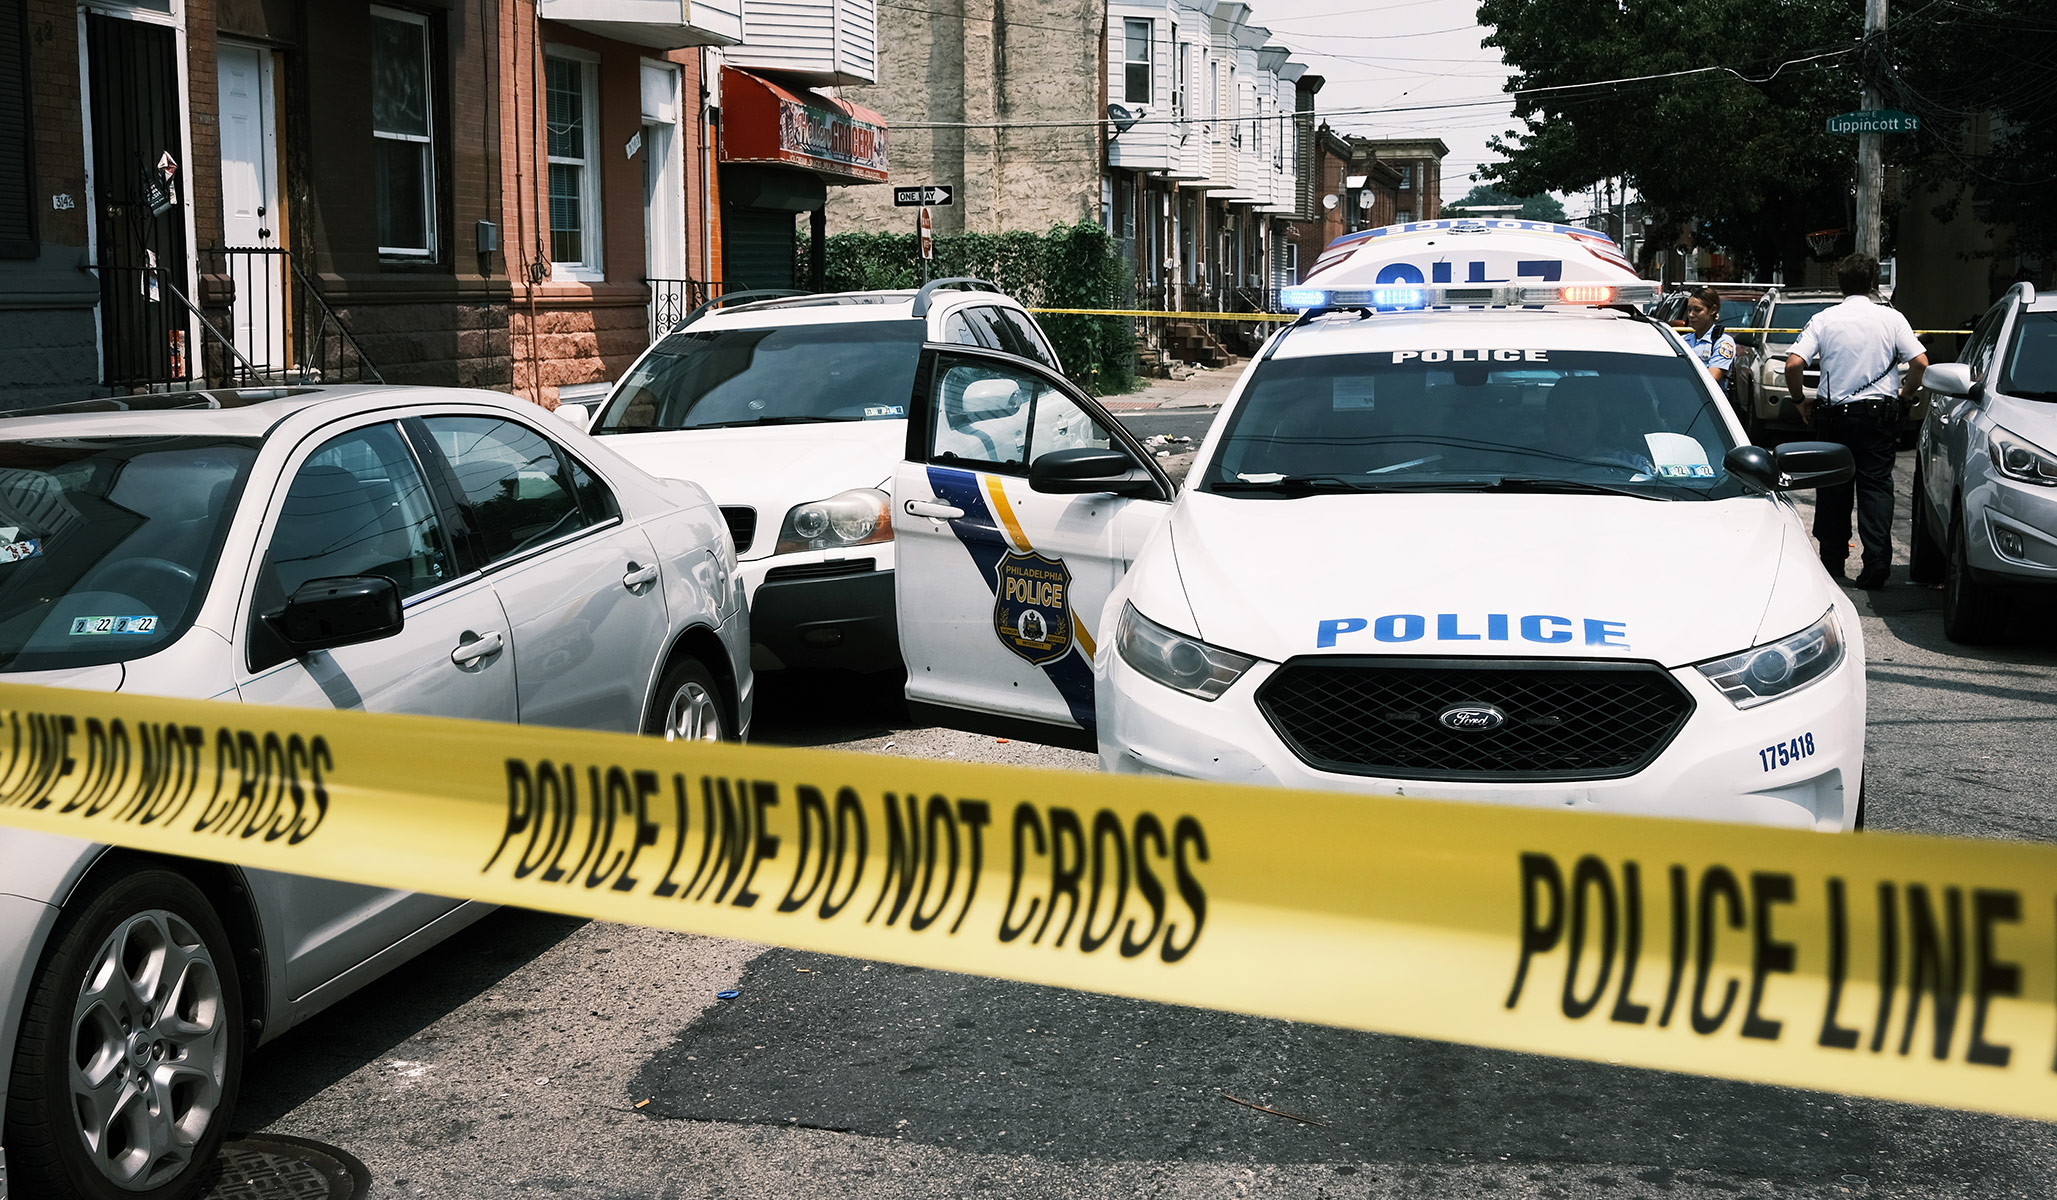 Philadelphia's Record-Breaking Murder Wave: A Failure of Political Will